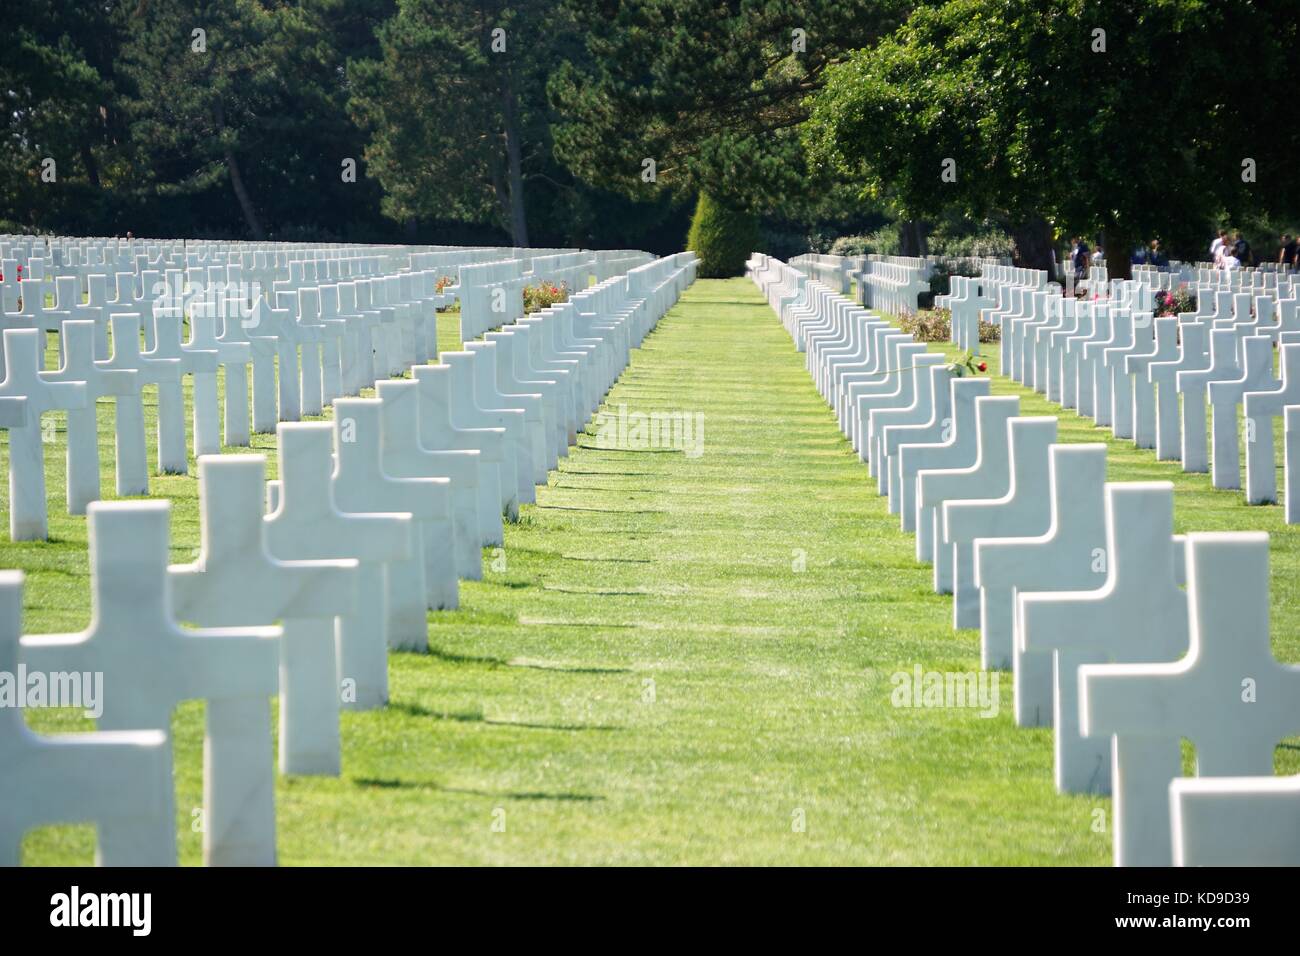 World War 2 memorial white crosses on grass with trees in background Stock Photo